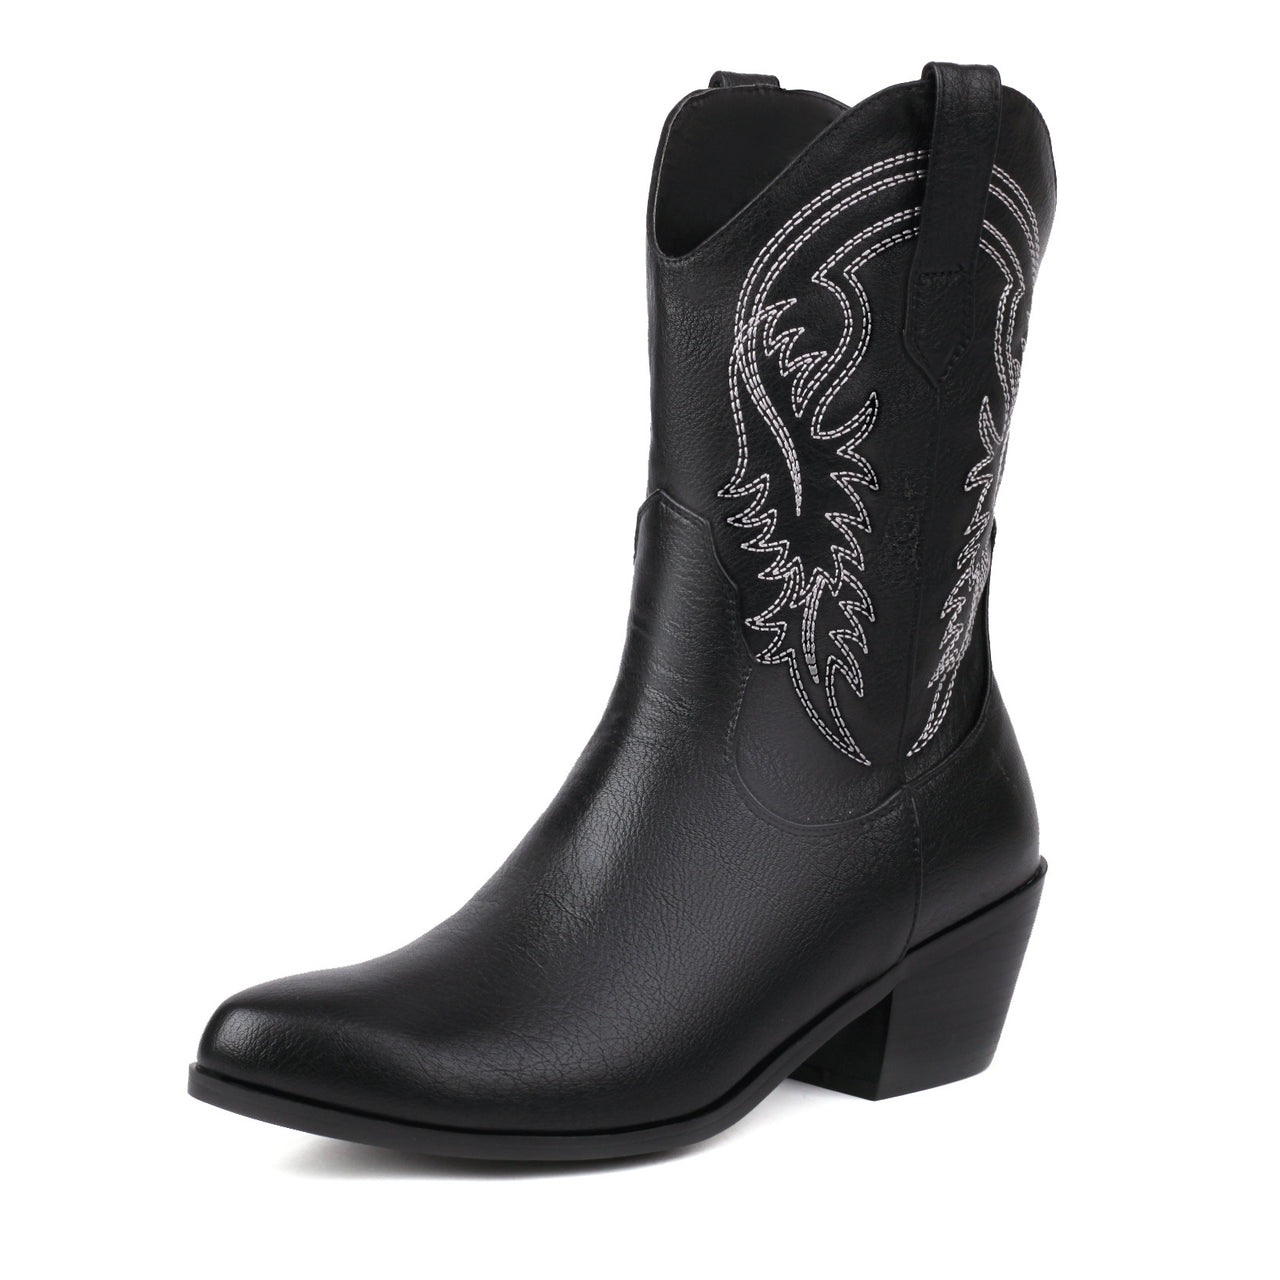 Women's Fashionable Simple Thick Mid Heel Sleeve Embroidered Ankle Boots